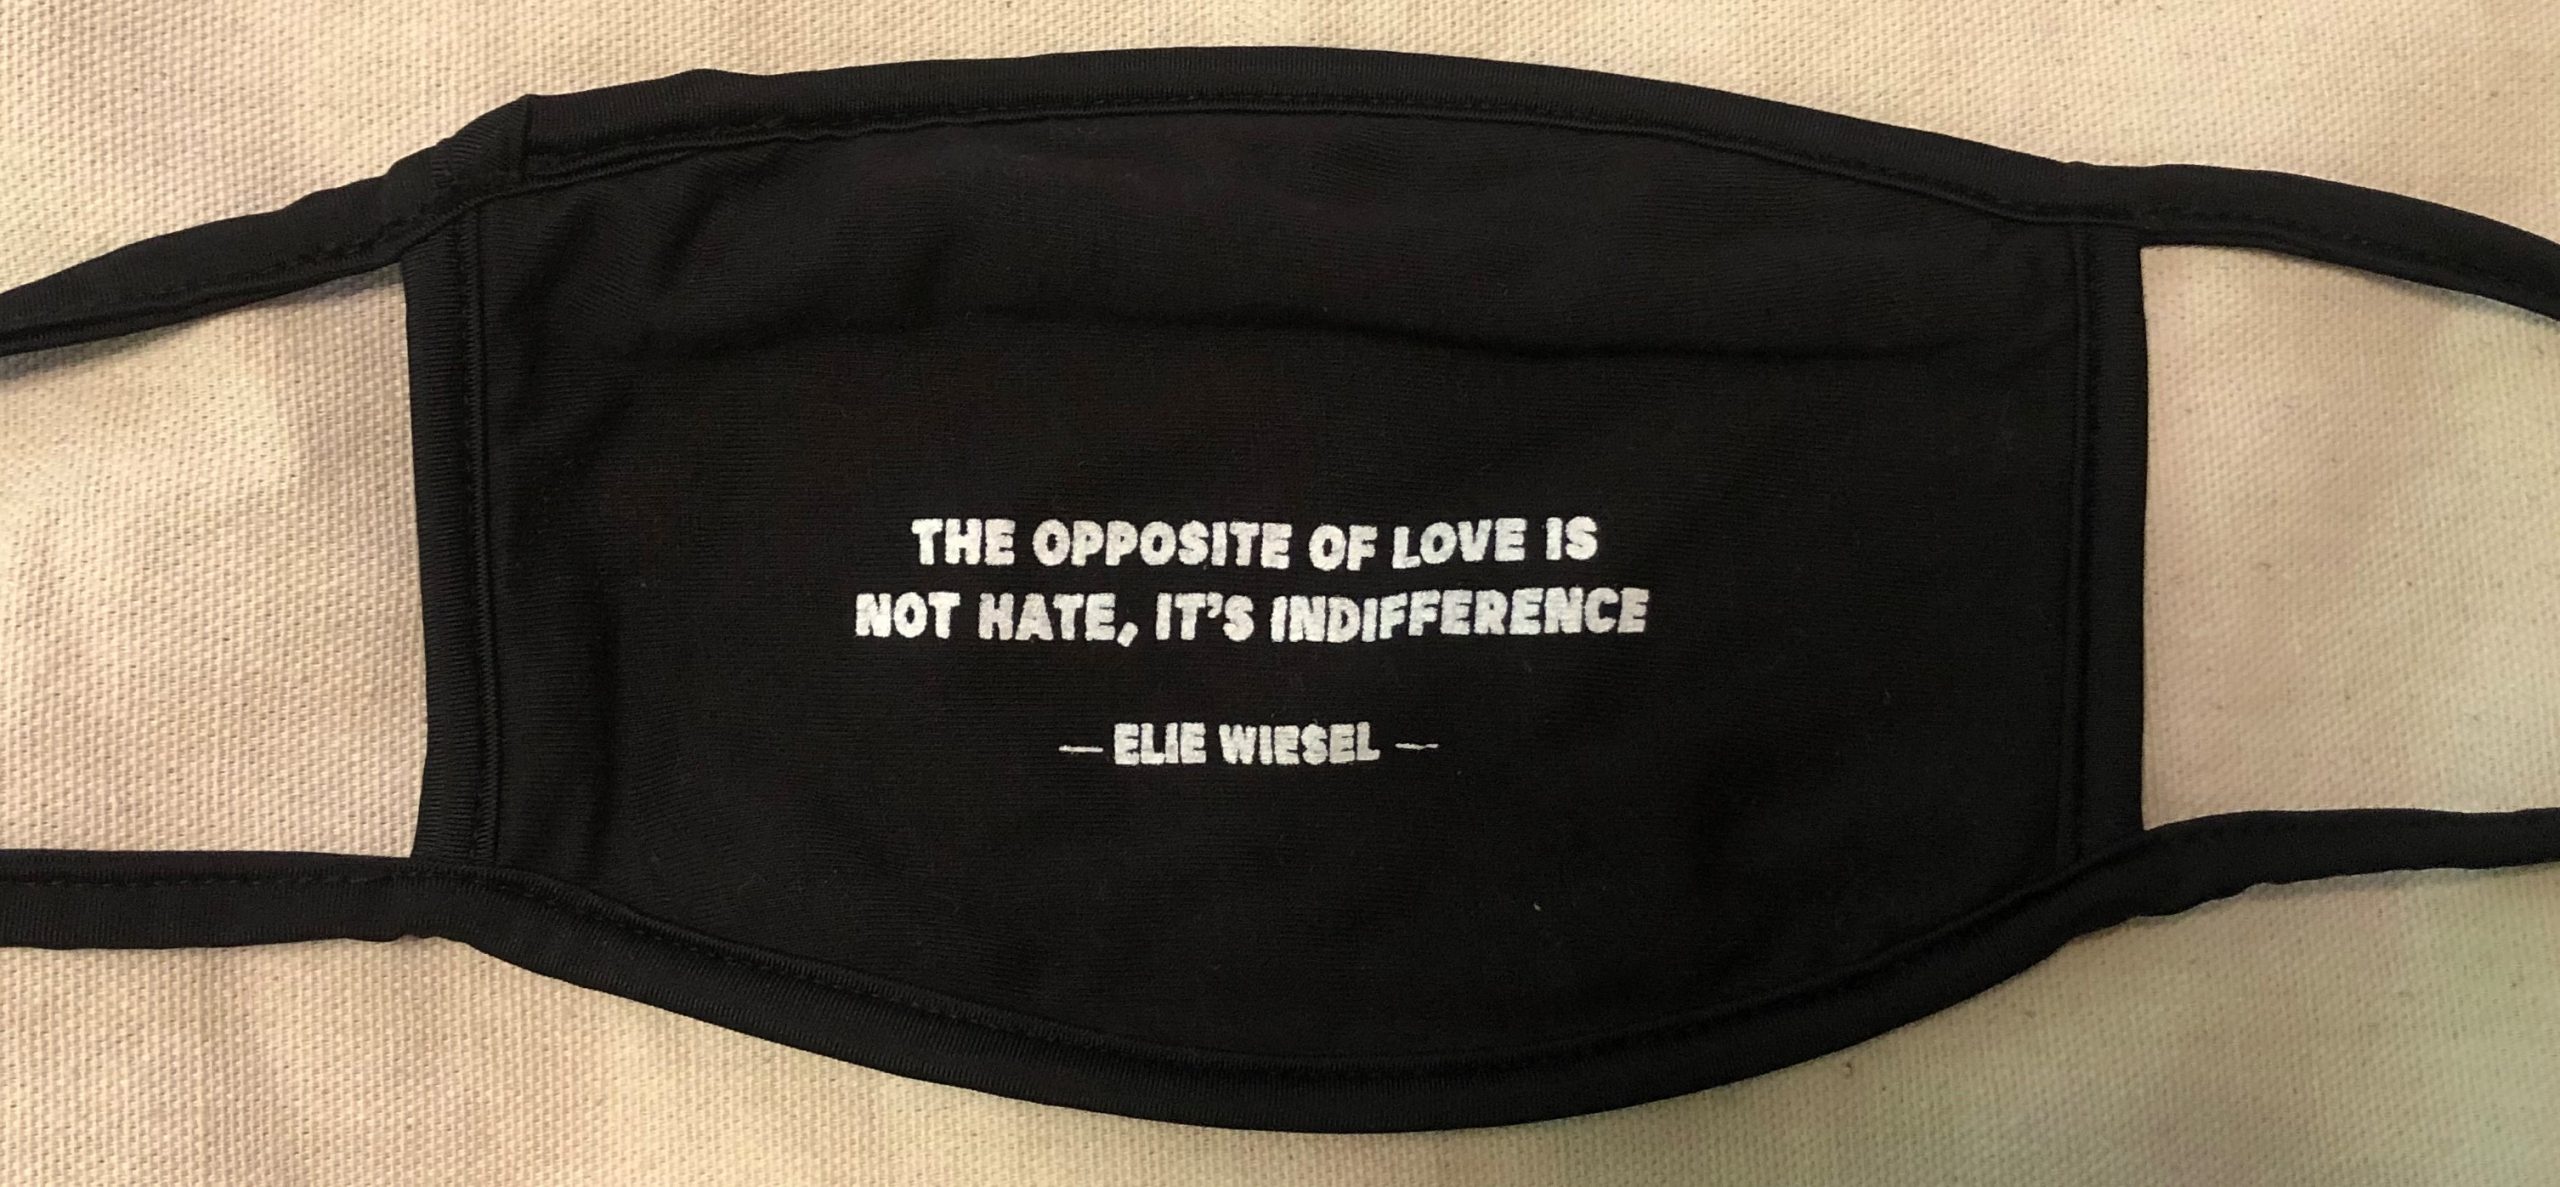 Elie Wiesel Mask "The Opposite of Love is not Hate, Its Indifference"